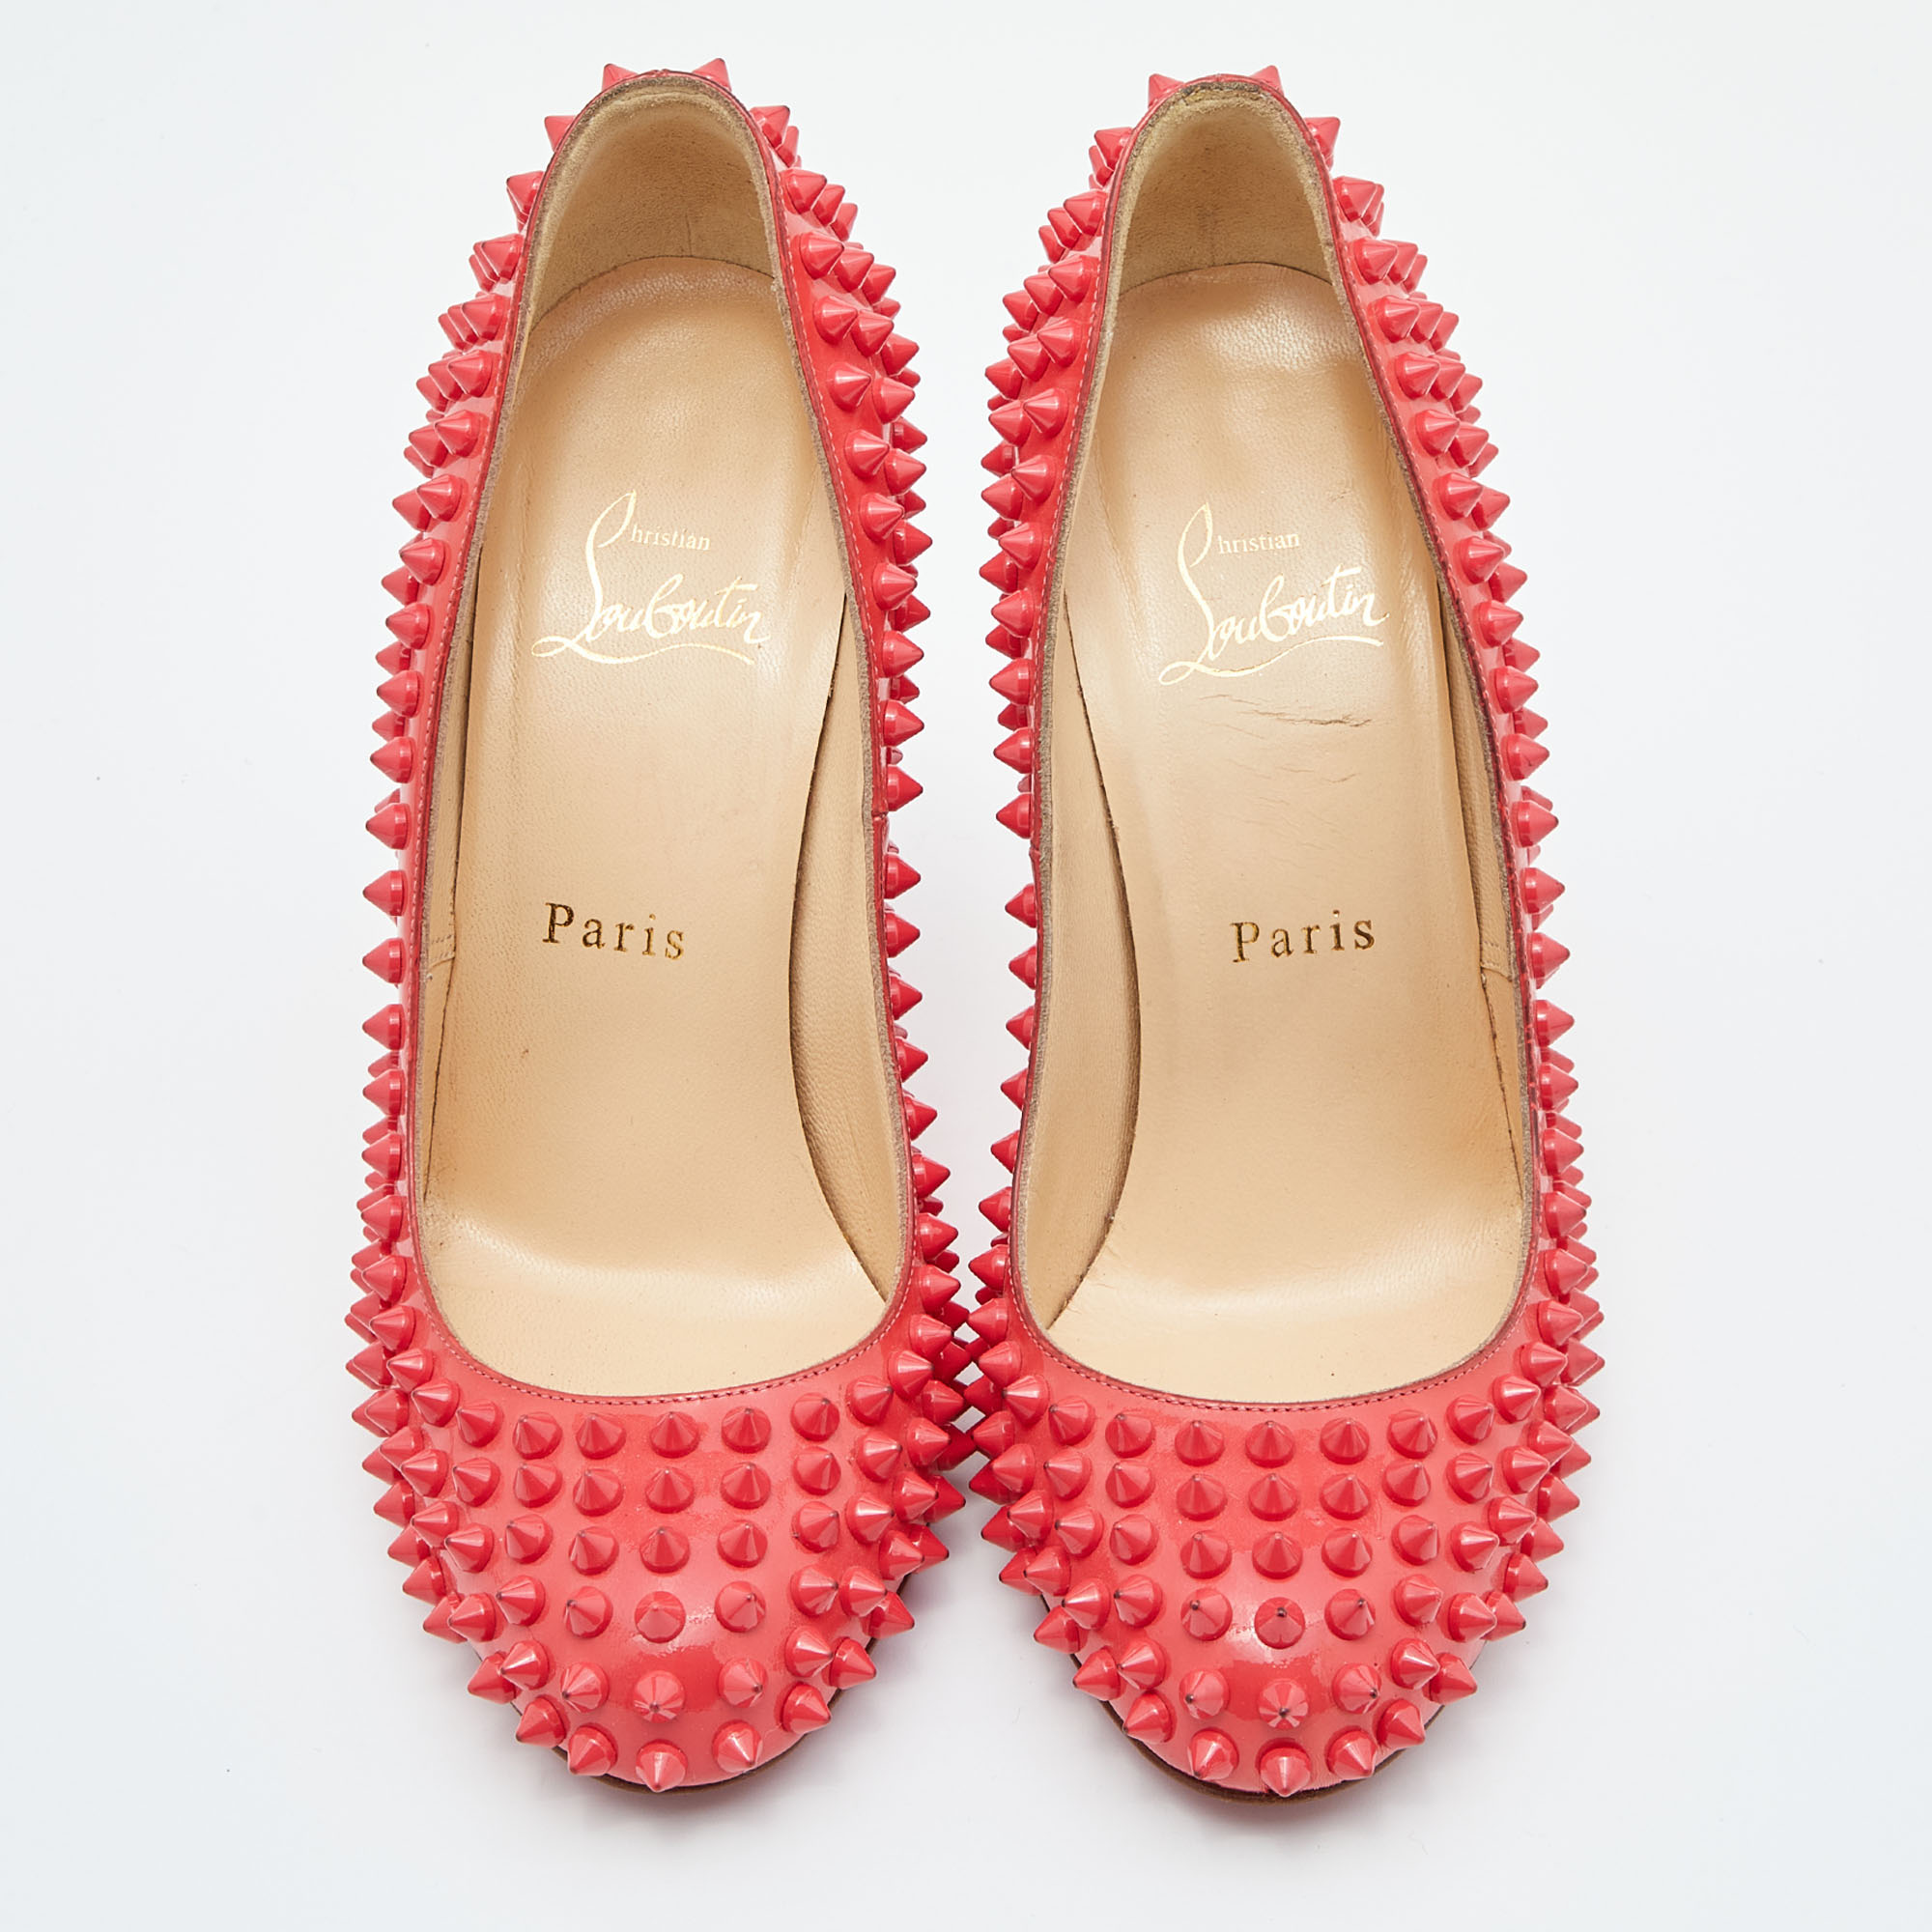 Christian Louboutin Coral Pink Patent Leather Fifi Spikes Pumps Size 36.5